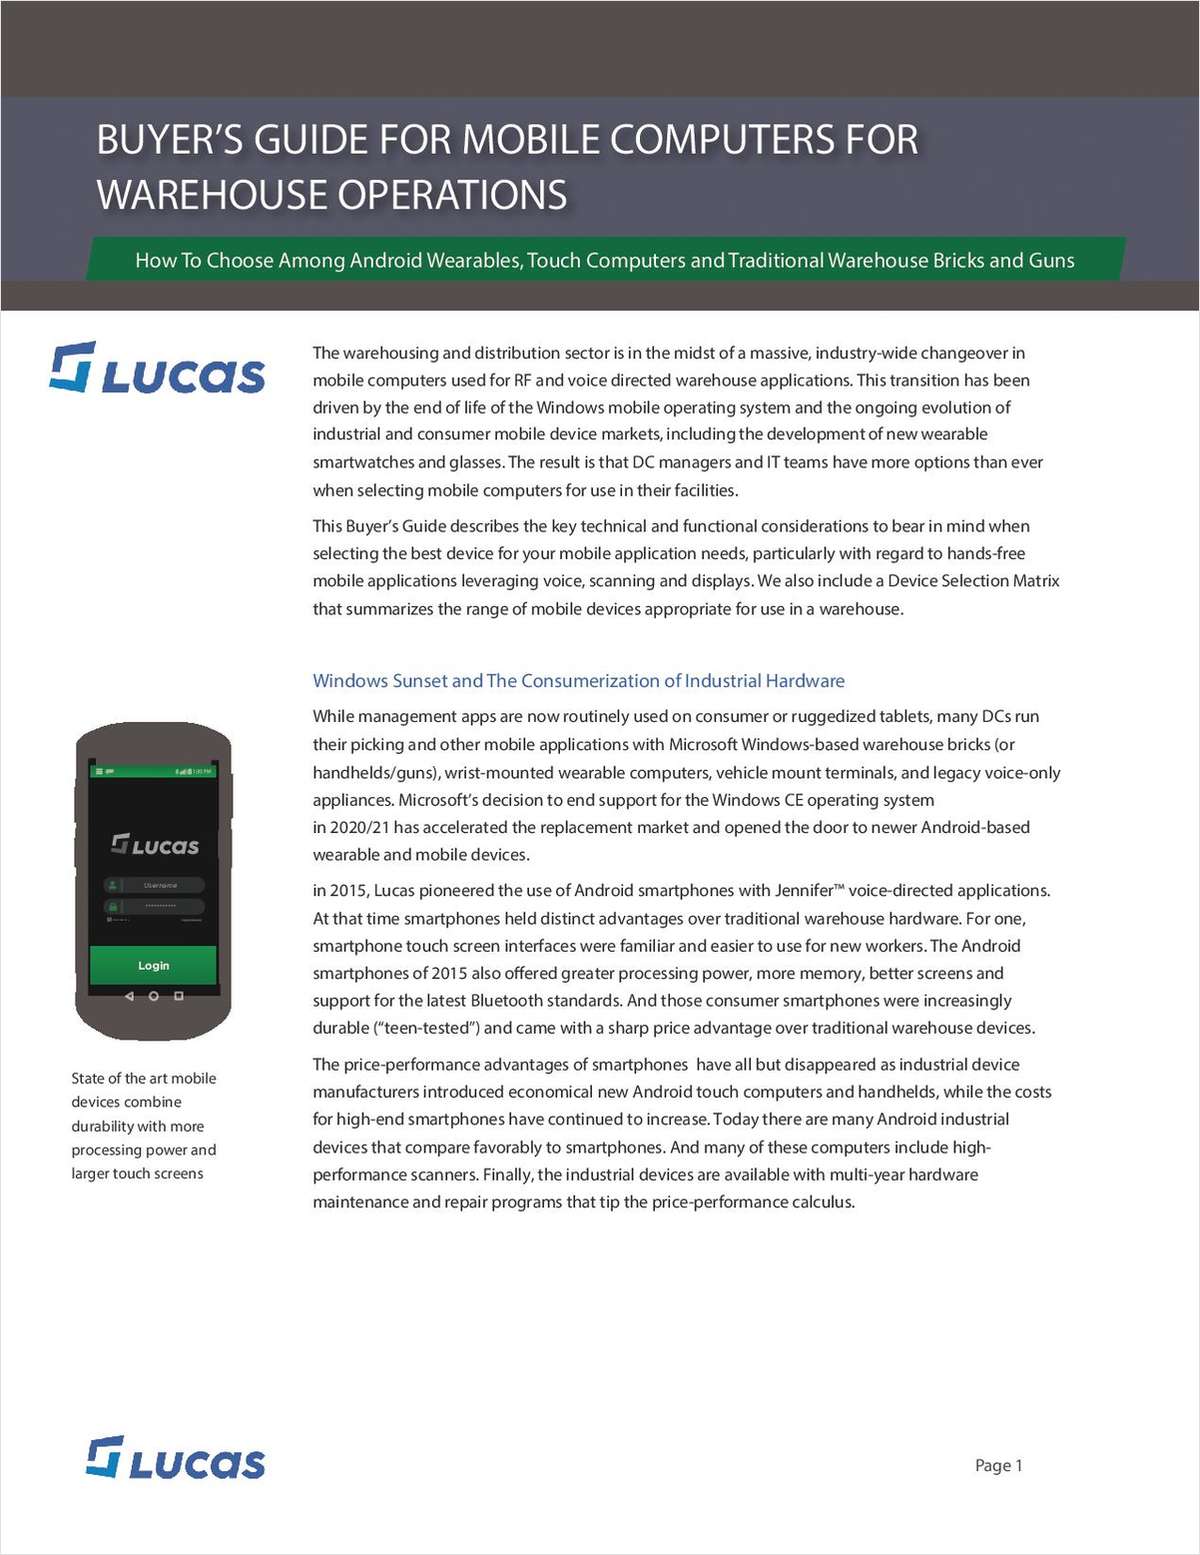 Buyer's Guide for Mobile Computers for Warehouse Operations